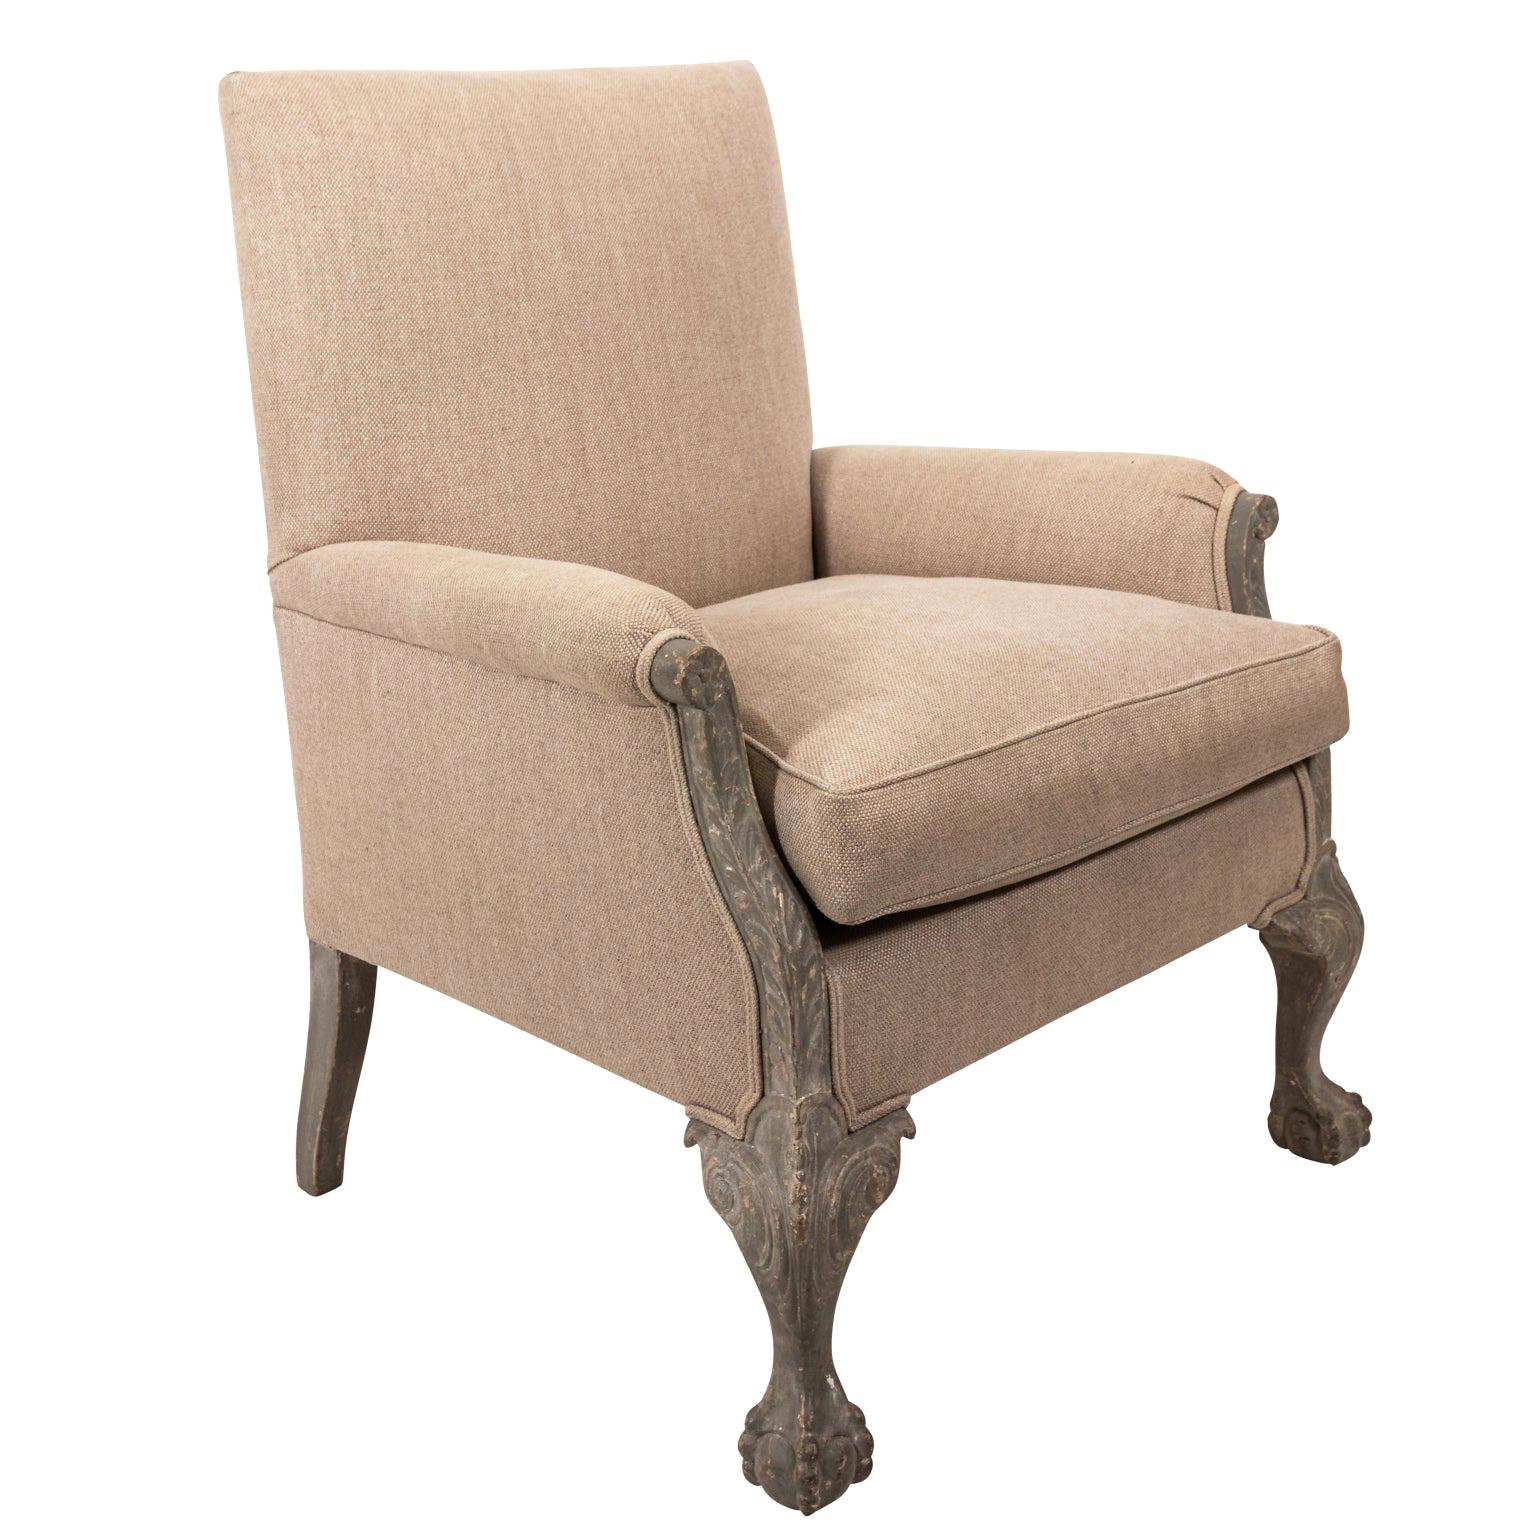 Upholstered Victorian Armchair, circa 1850s